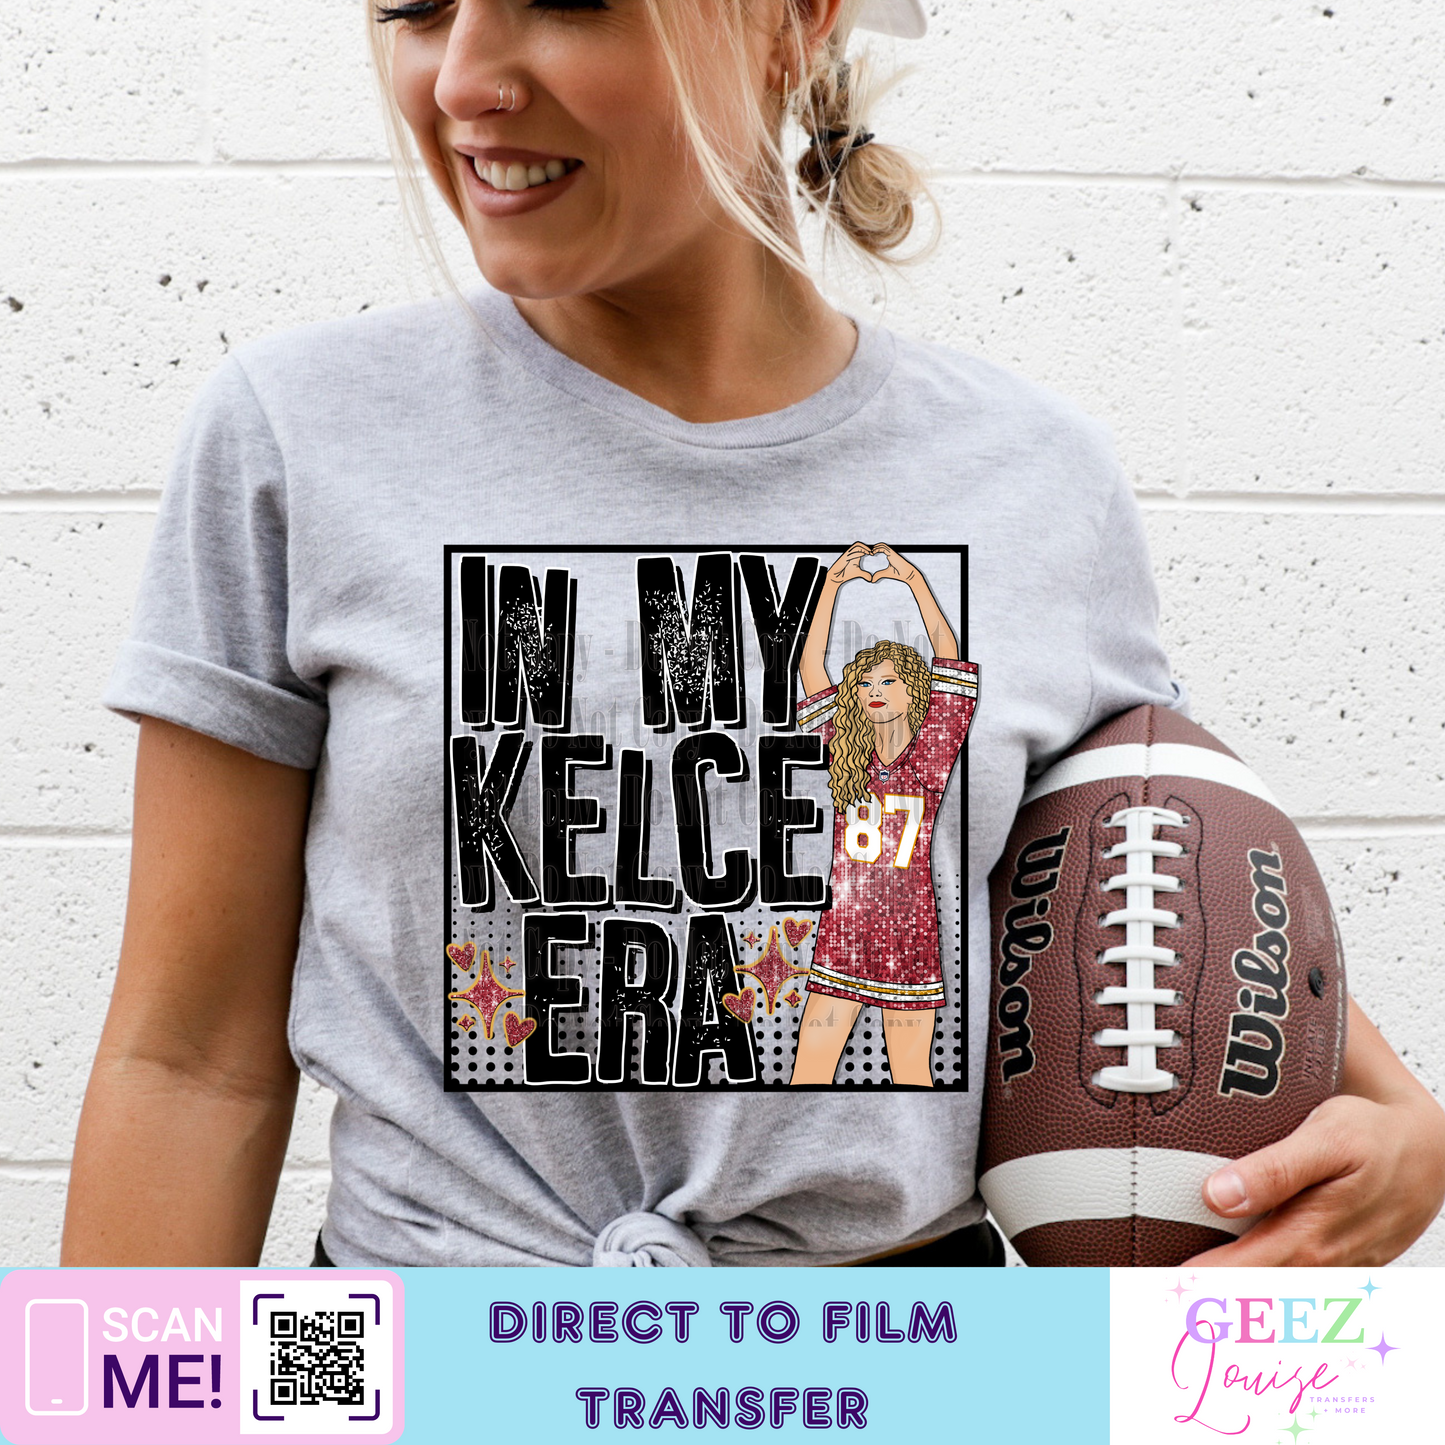 kc era - Direct to Film Transfer - made to order